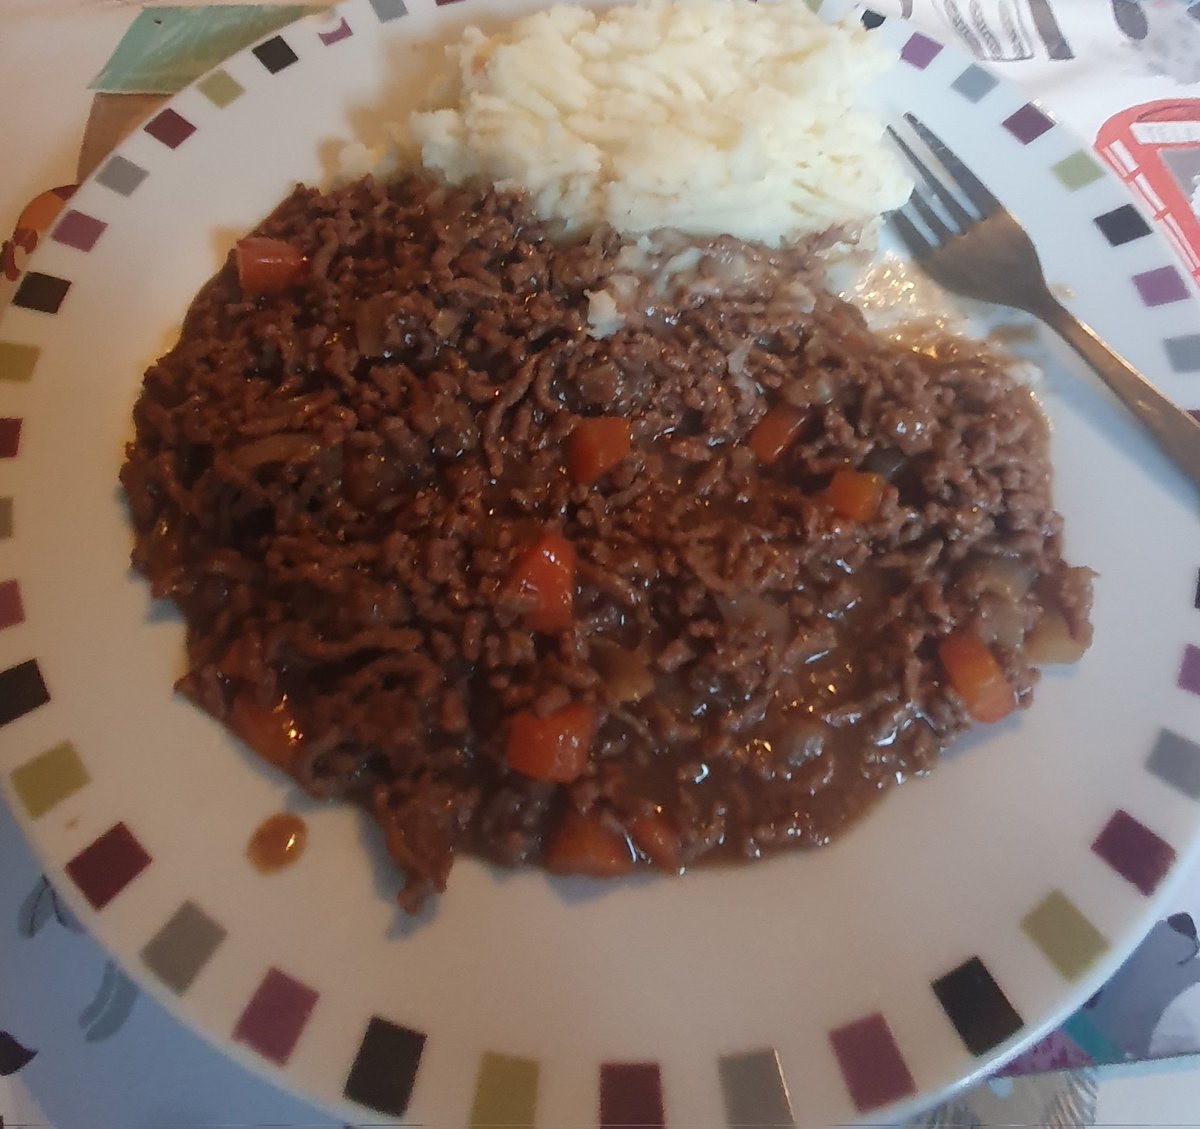 Mince and tatties for dinner like I'm Oor Wullie or something. Braw!